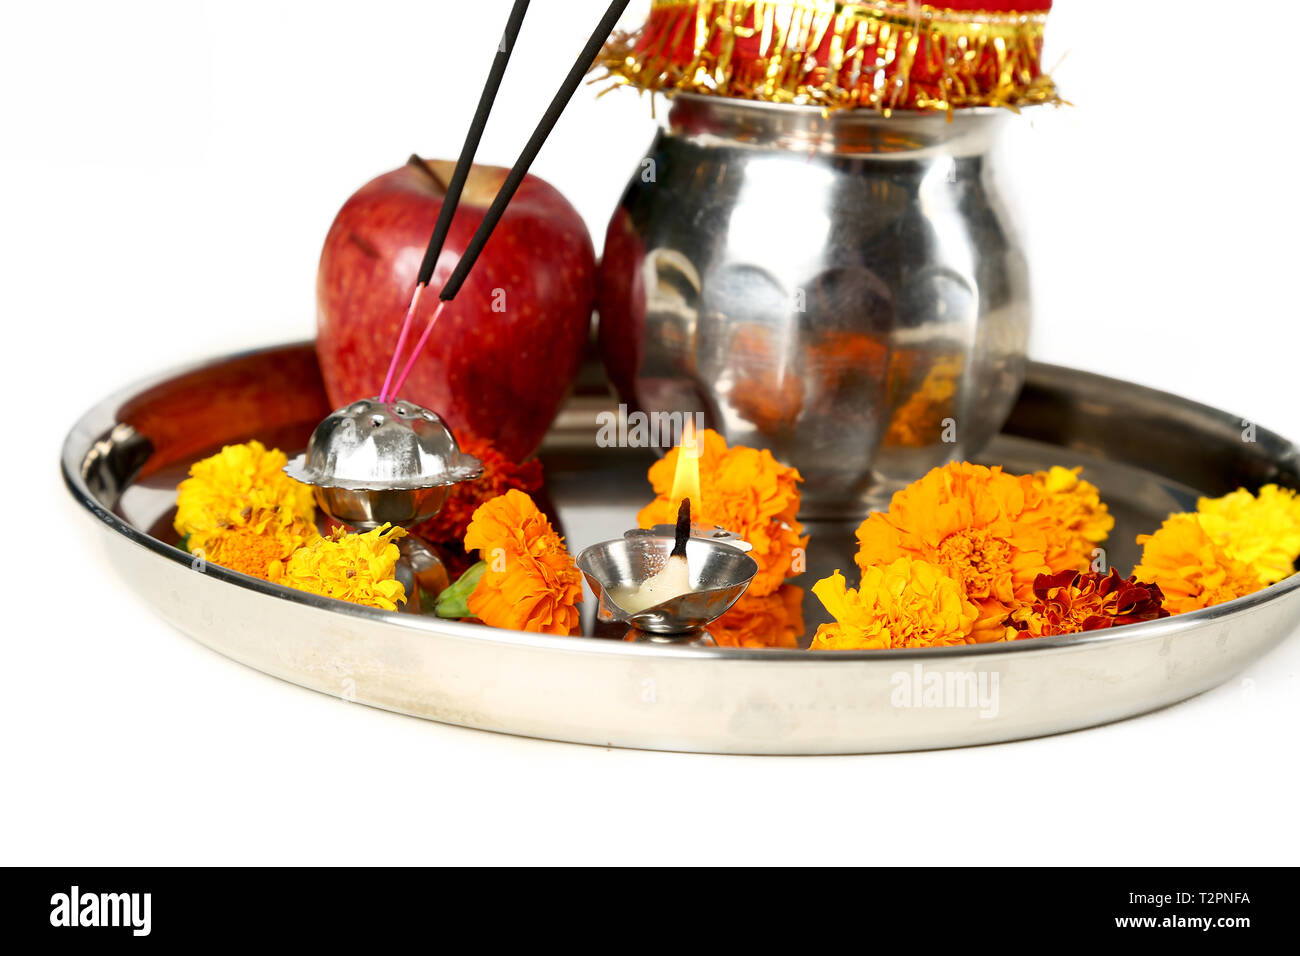 Picture of ready navratri pooja thali. ISolated on the white background. Stock Photo